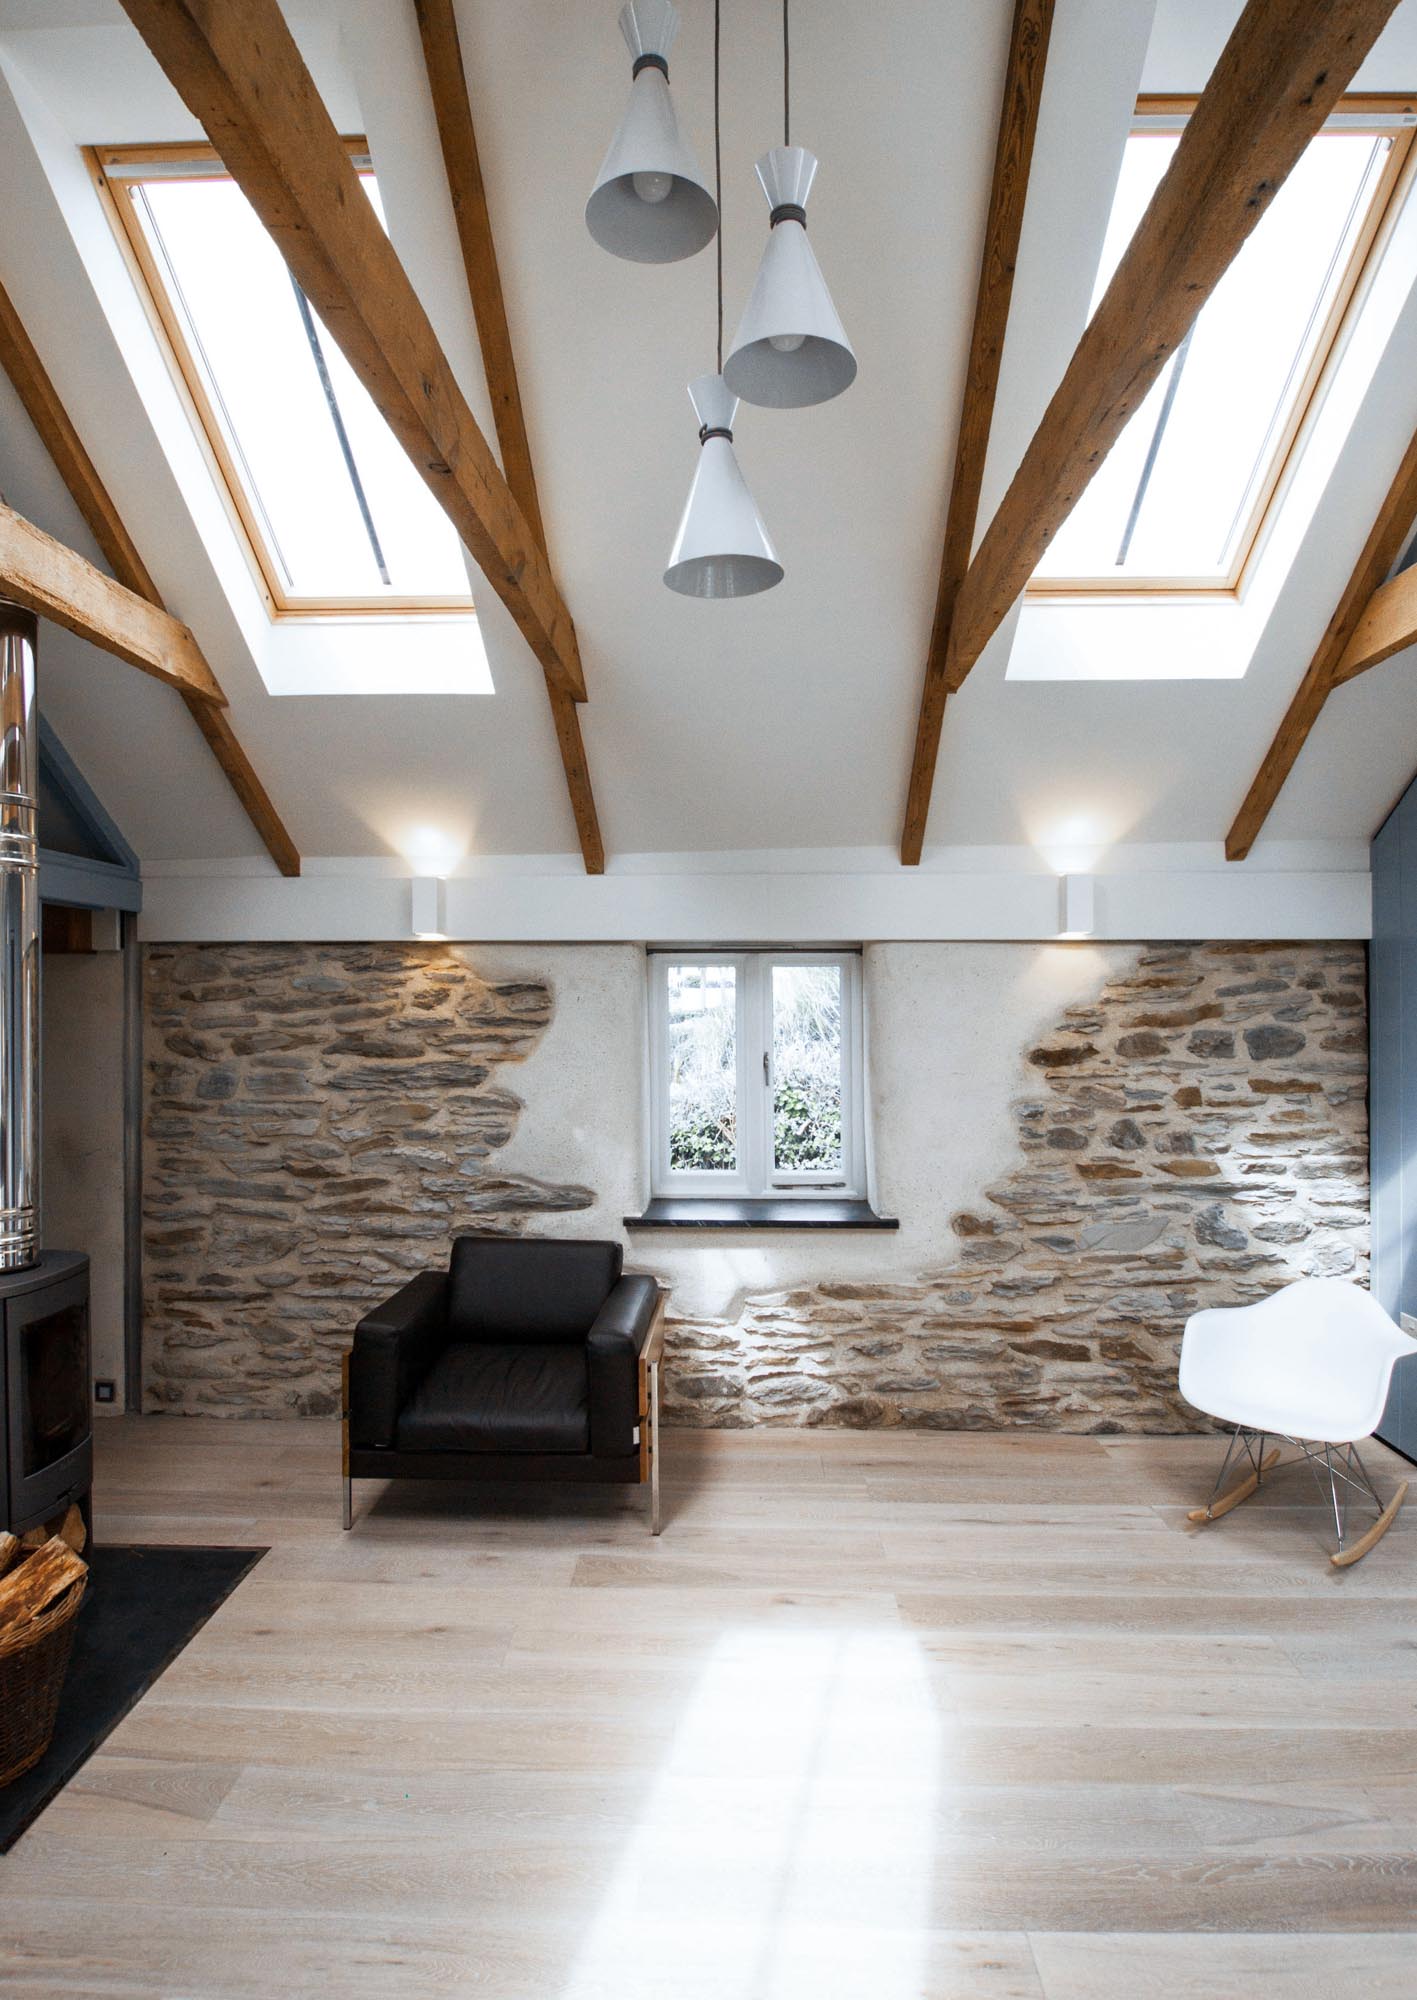 Exposed stone and original timber beams in the beautiful cottage.